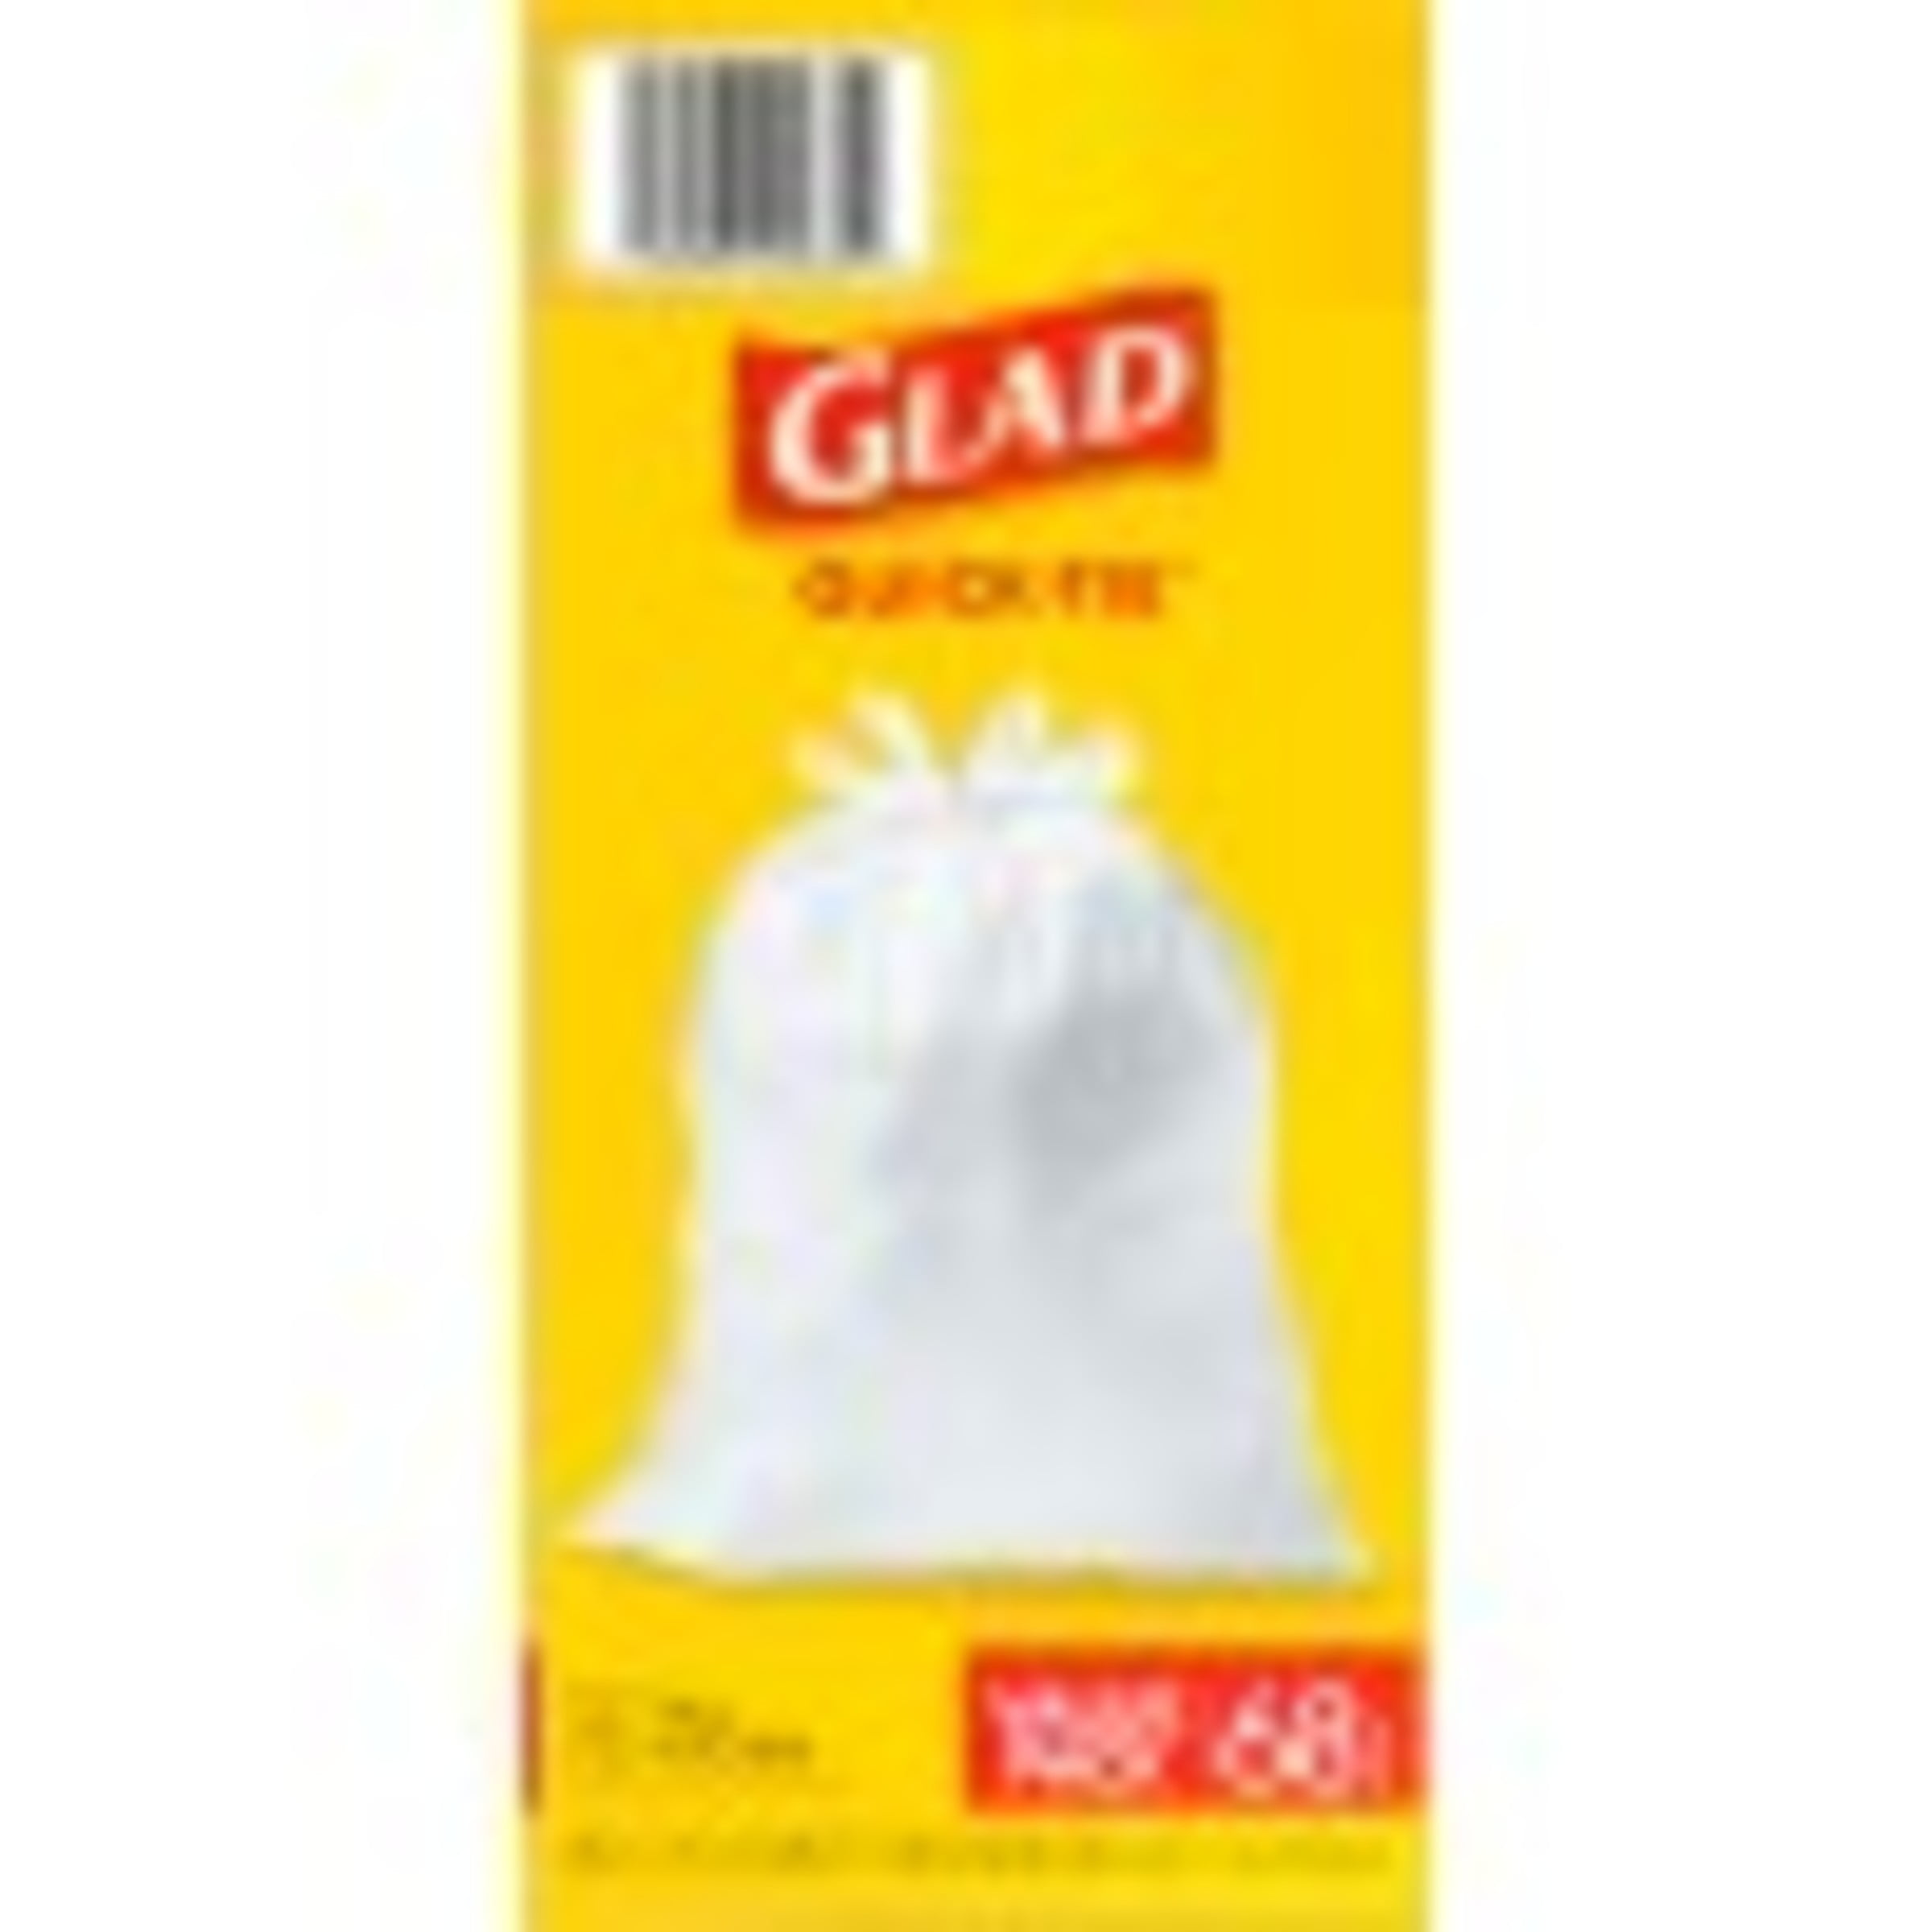 Buy Glad Quick-Tie Tall Kitchen T Bags, 13 Gallon T Bags for Tall T Can,  200 Count - 15931 Online at desertcartINDIA